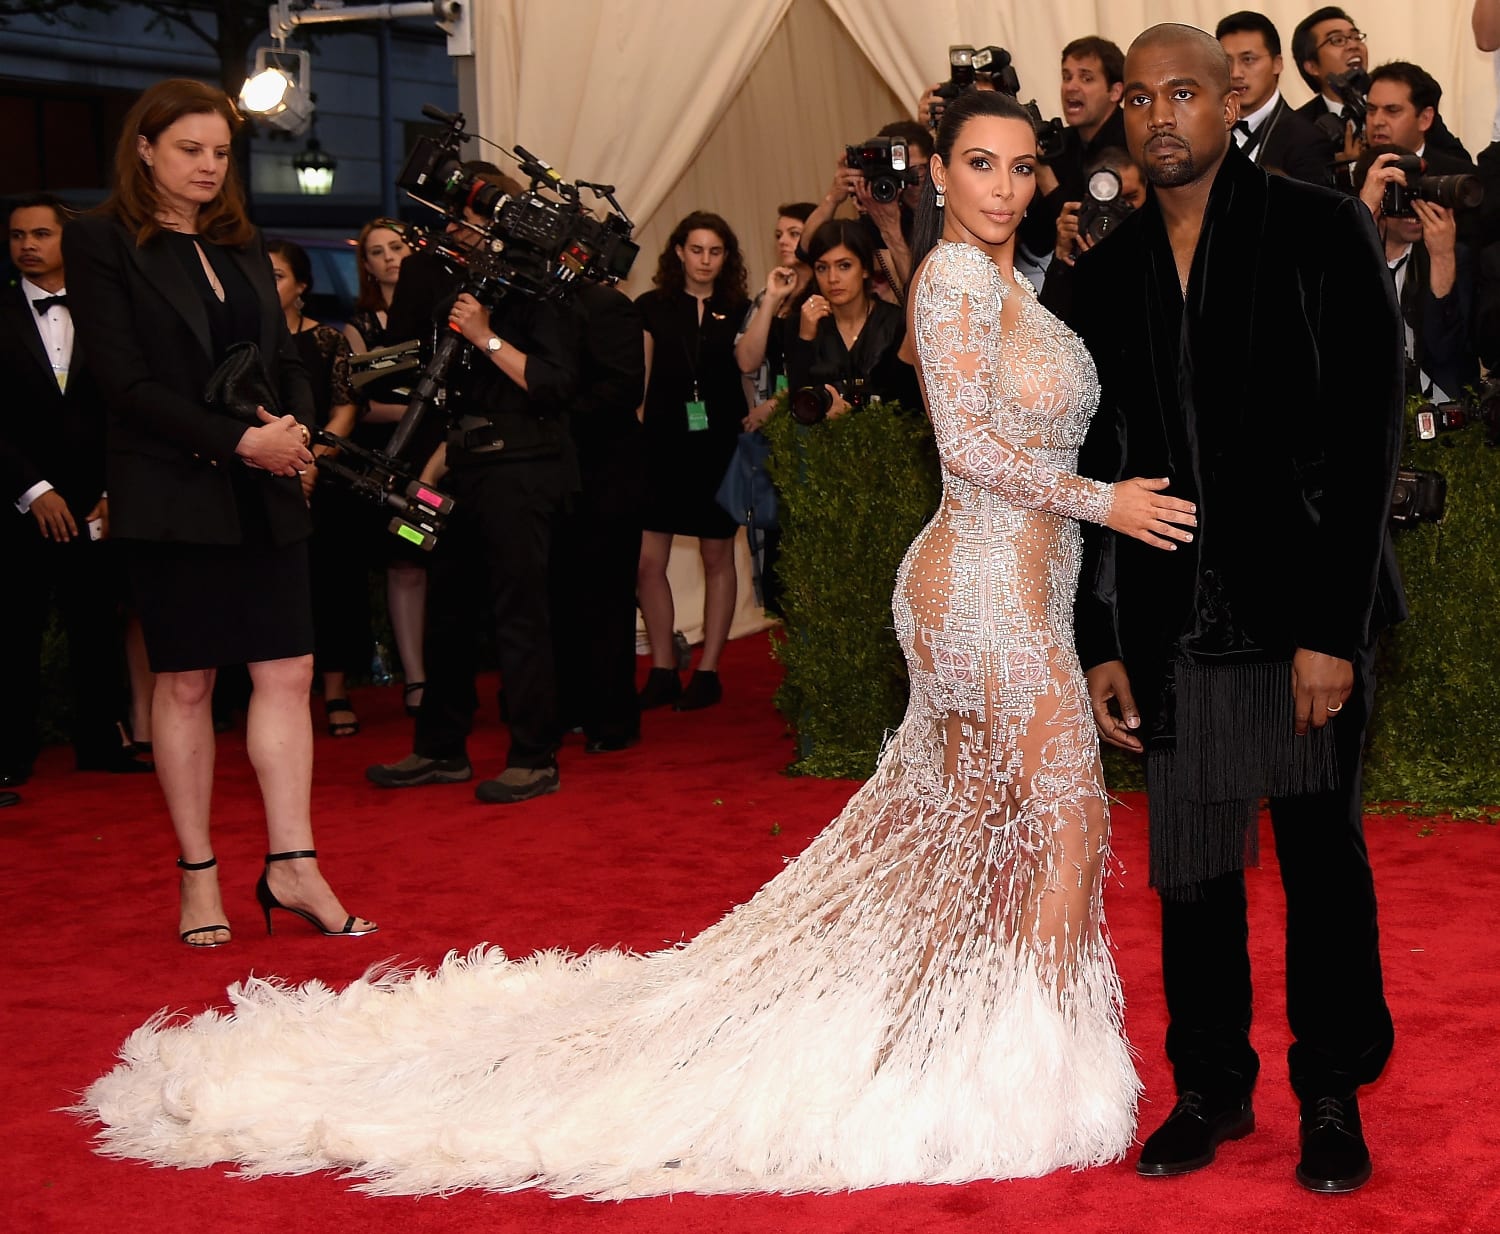 Met Gala 2015: Photos of the Celebrities and their Designer Dresses